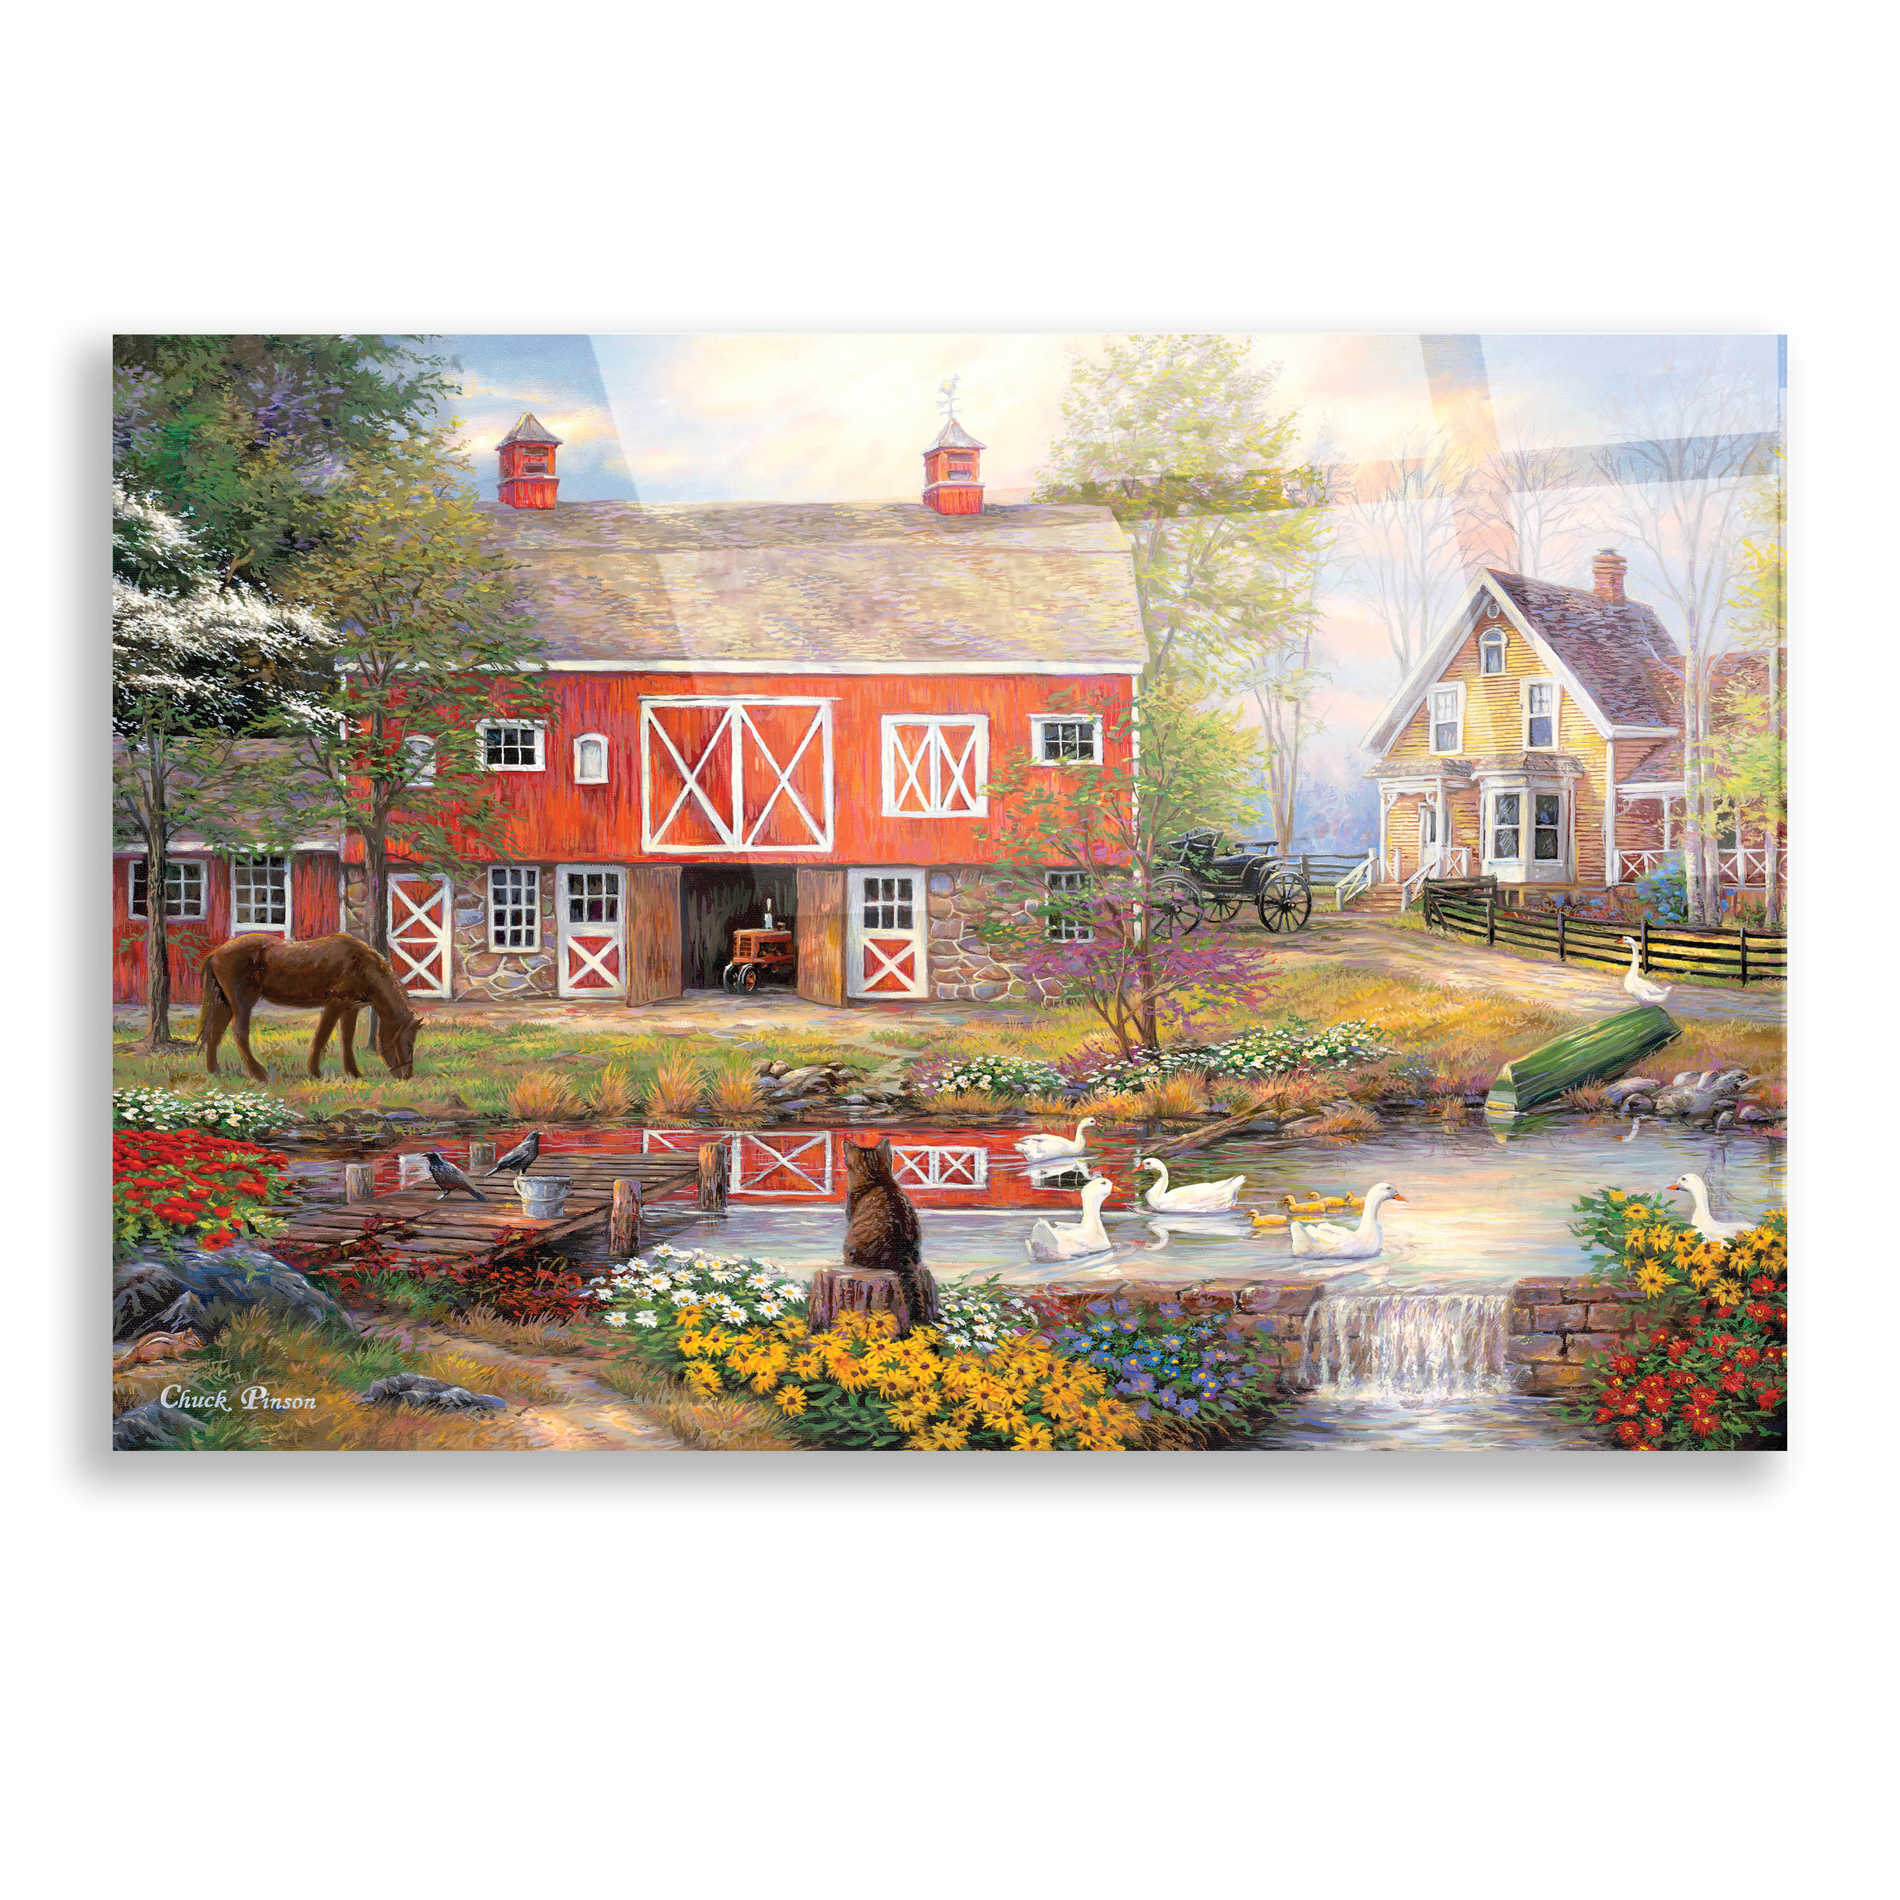 Epic Art 'Reflections On Country Living' by Chuck Pinson, Acrylic Glass Wall Art